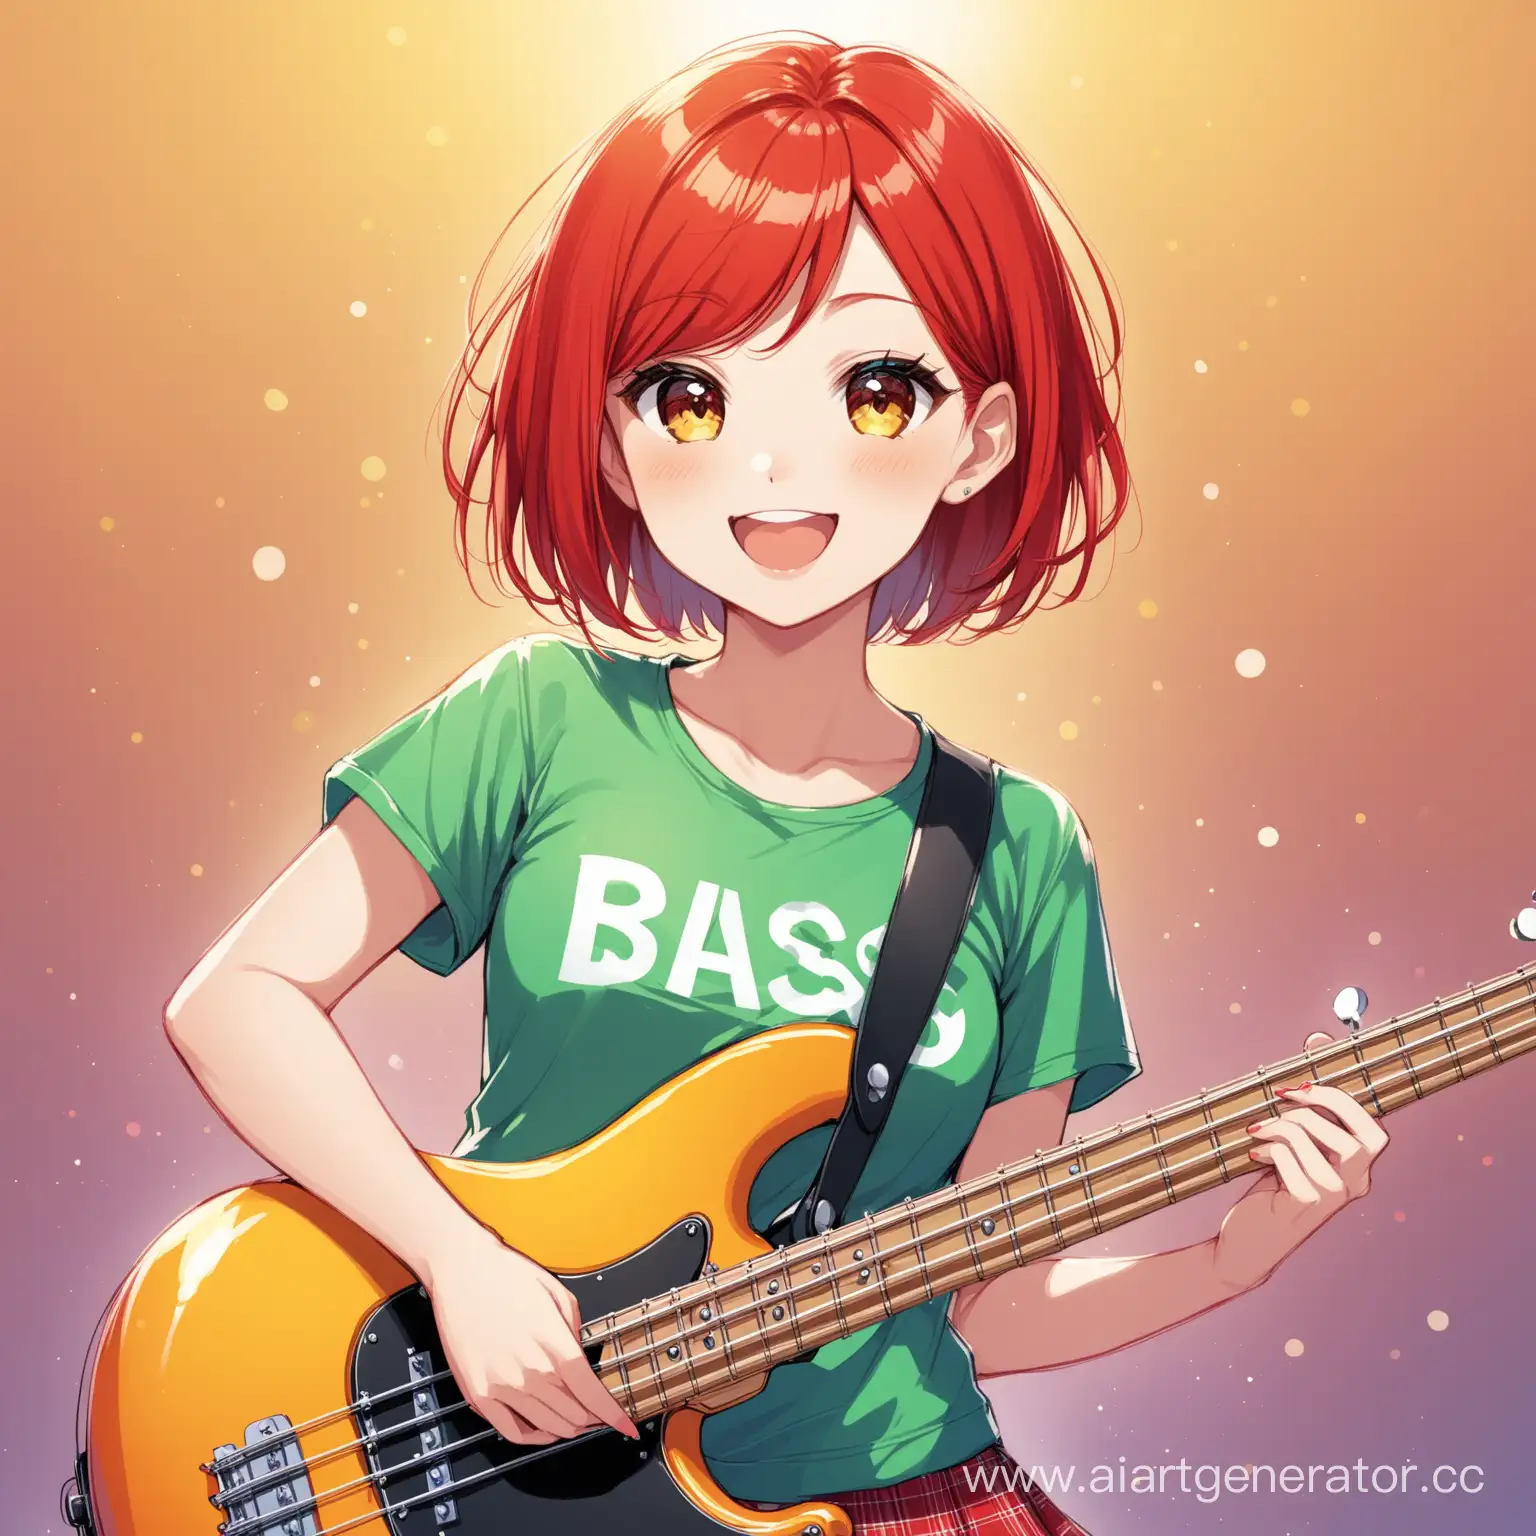 A girl with short red hair. She is wearing a T-shirt with a skirt. She is very cheerful, and also plays bass guitar in a band.